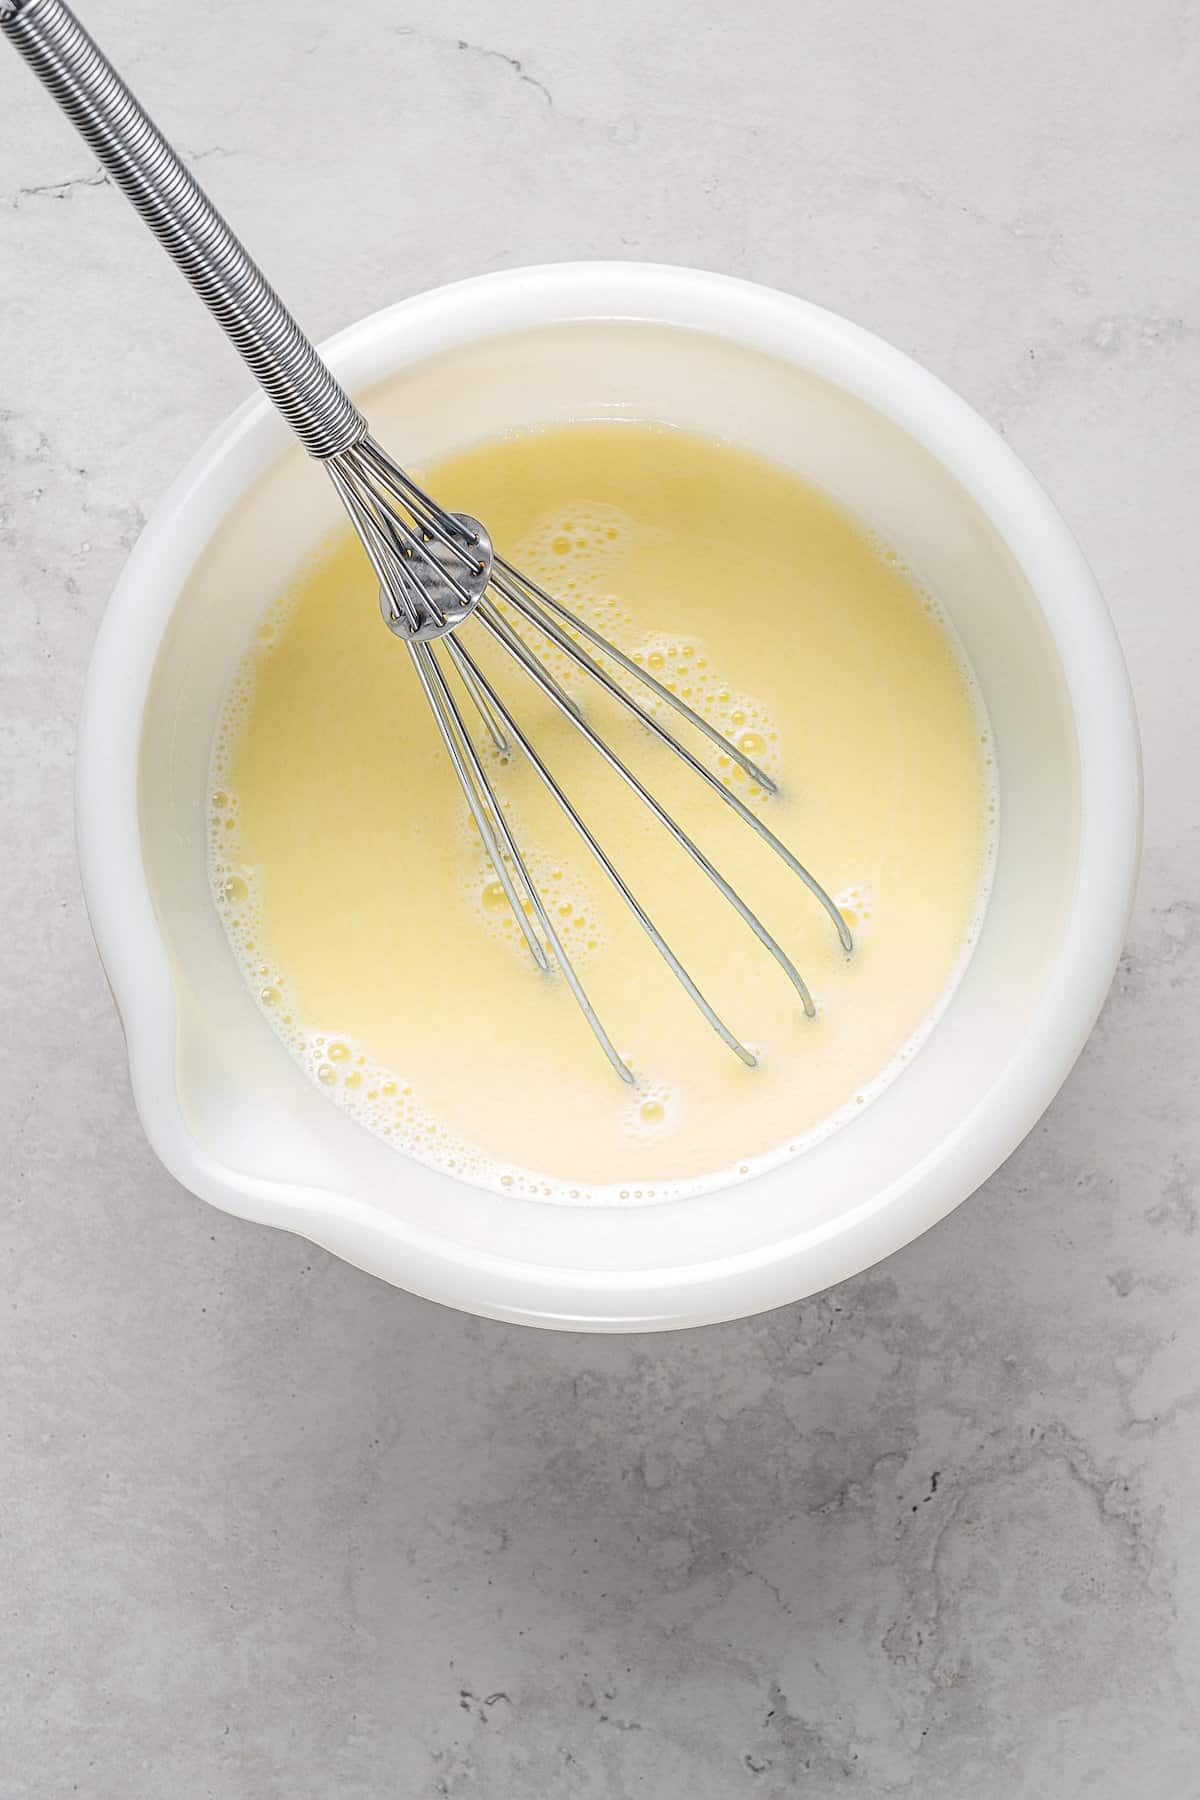 Milk and melted butter whisked together in a plastic bowl.